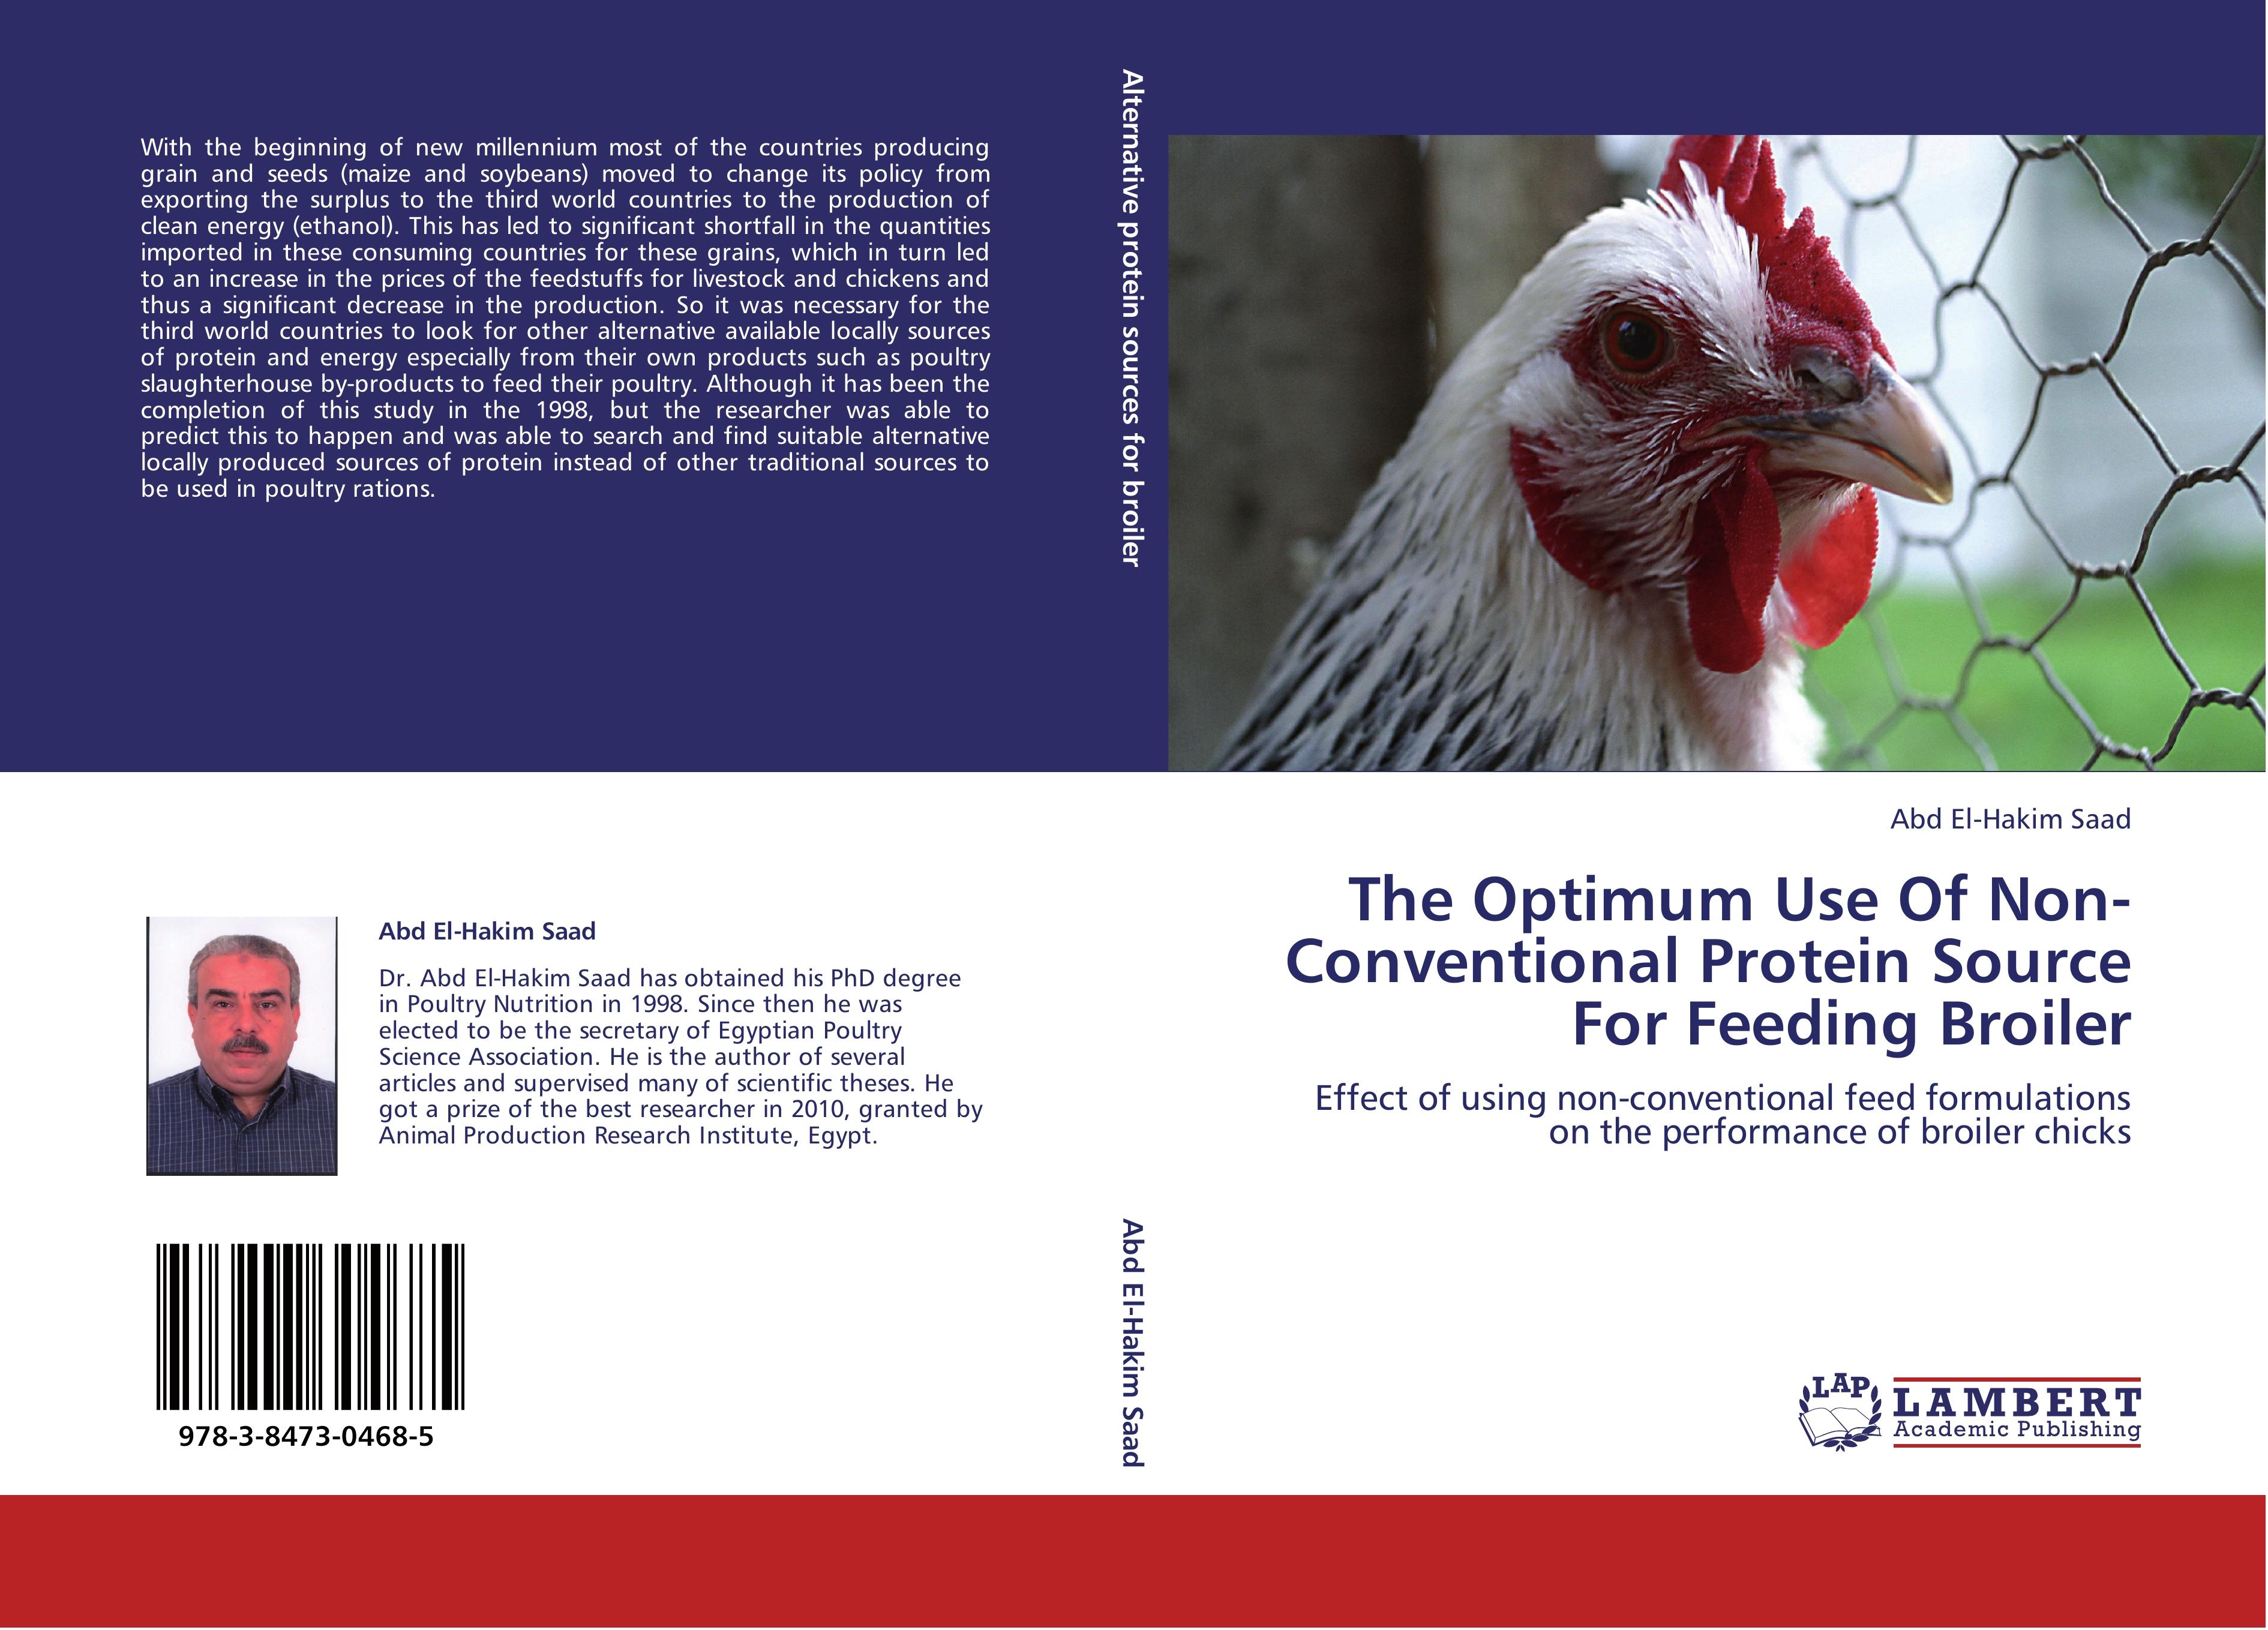 The Optimum Use Of Non-Conventional Protein Source For Feeding Broiler | Effect of using non-conventional feed formulations on the performance of broiler chicks | Abd El-Hakim Saad | Taschenbuch - Saad, Abd El-Hakim